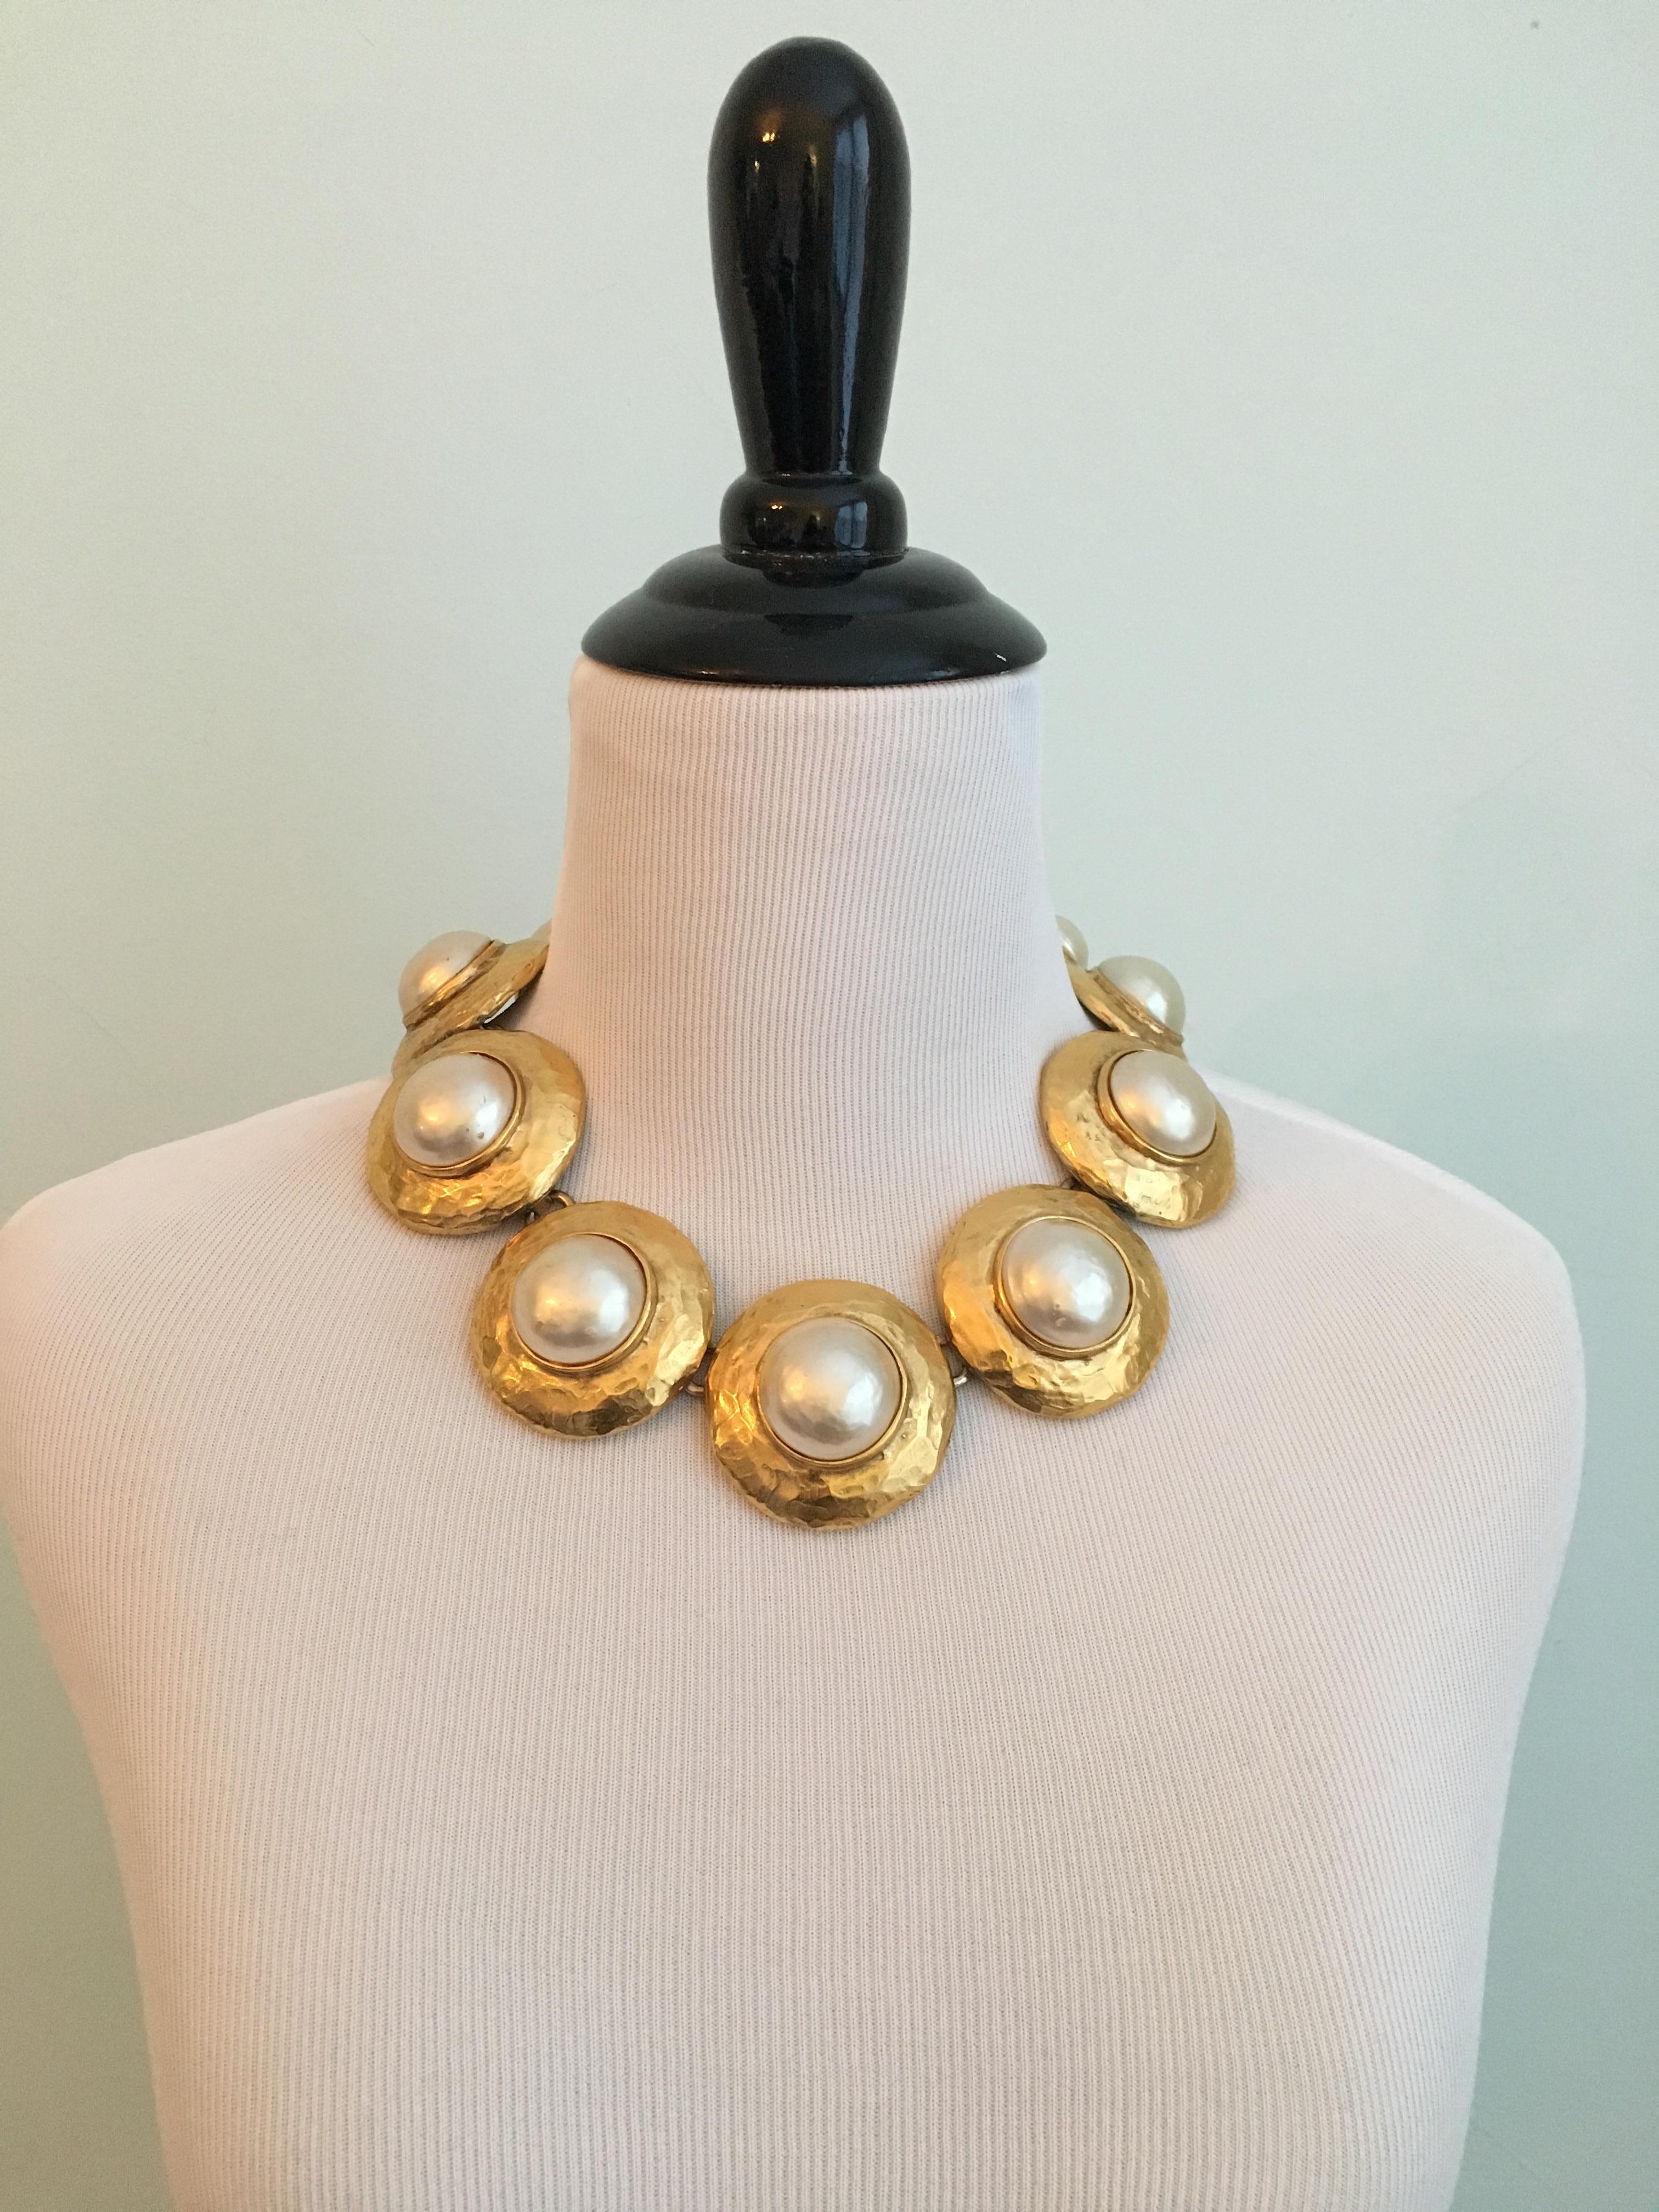 Striking 1980s Yves Saint Laurent necklace made up of large gold plated disks with faux pearl centers made by Goossens. The faux pearls are coated in a thick pearl nacre which give them a beautiful luminous quality. The necklace is adjustable and